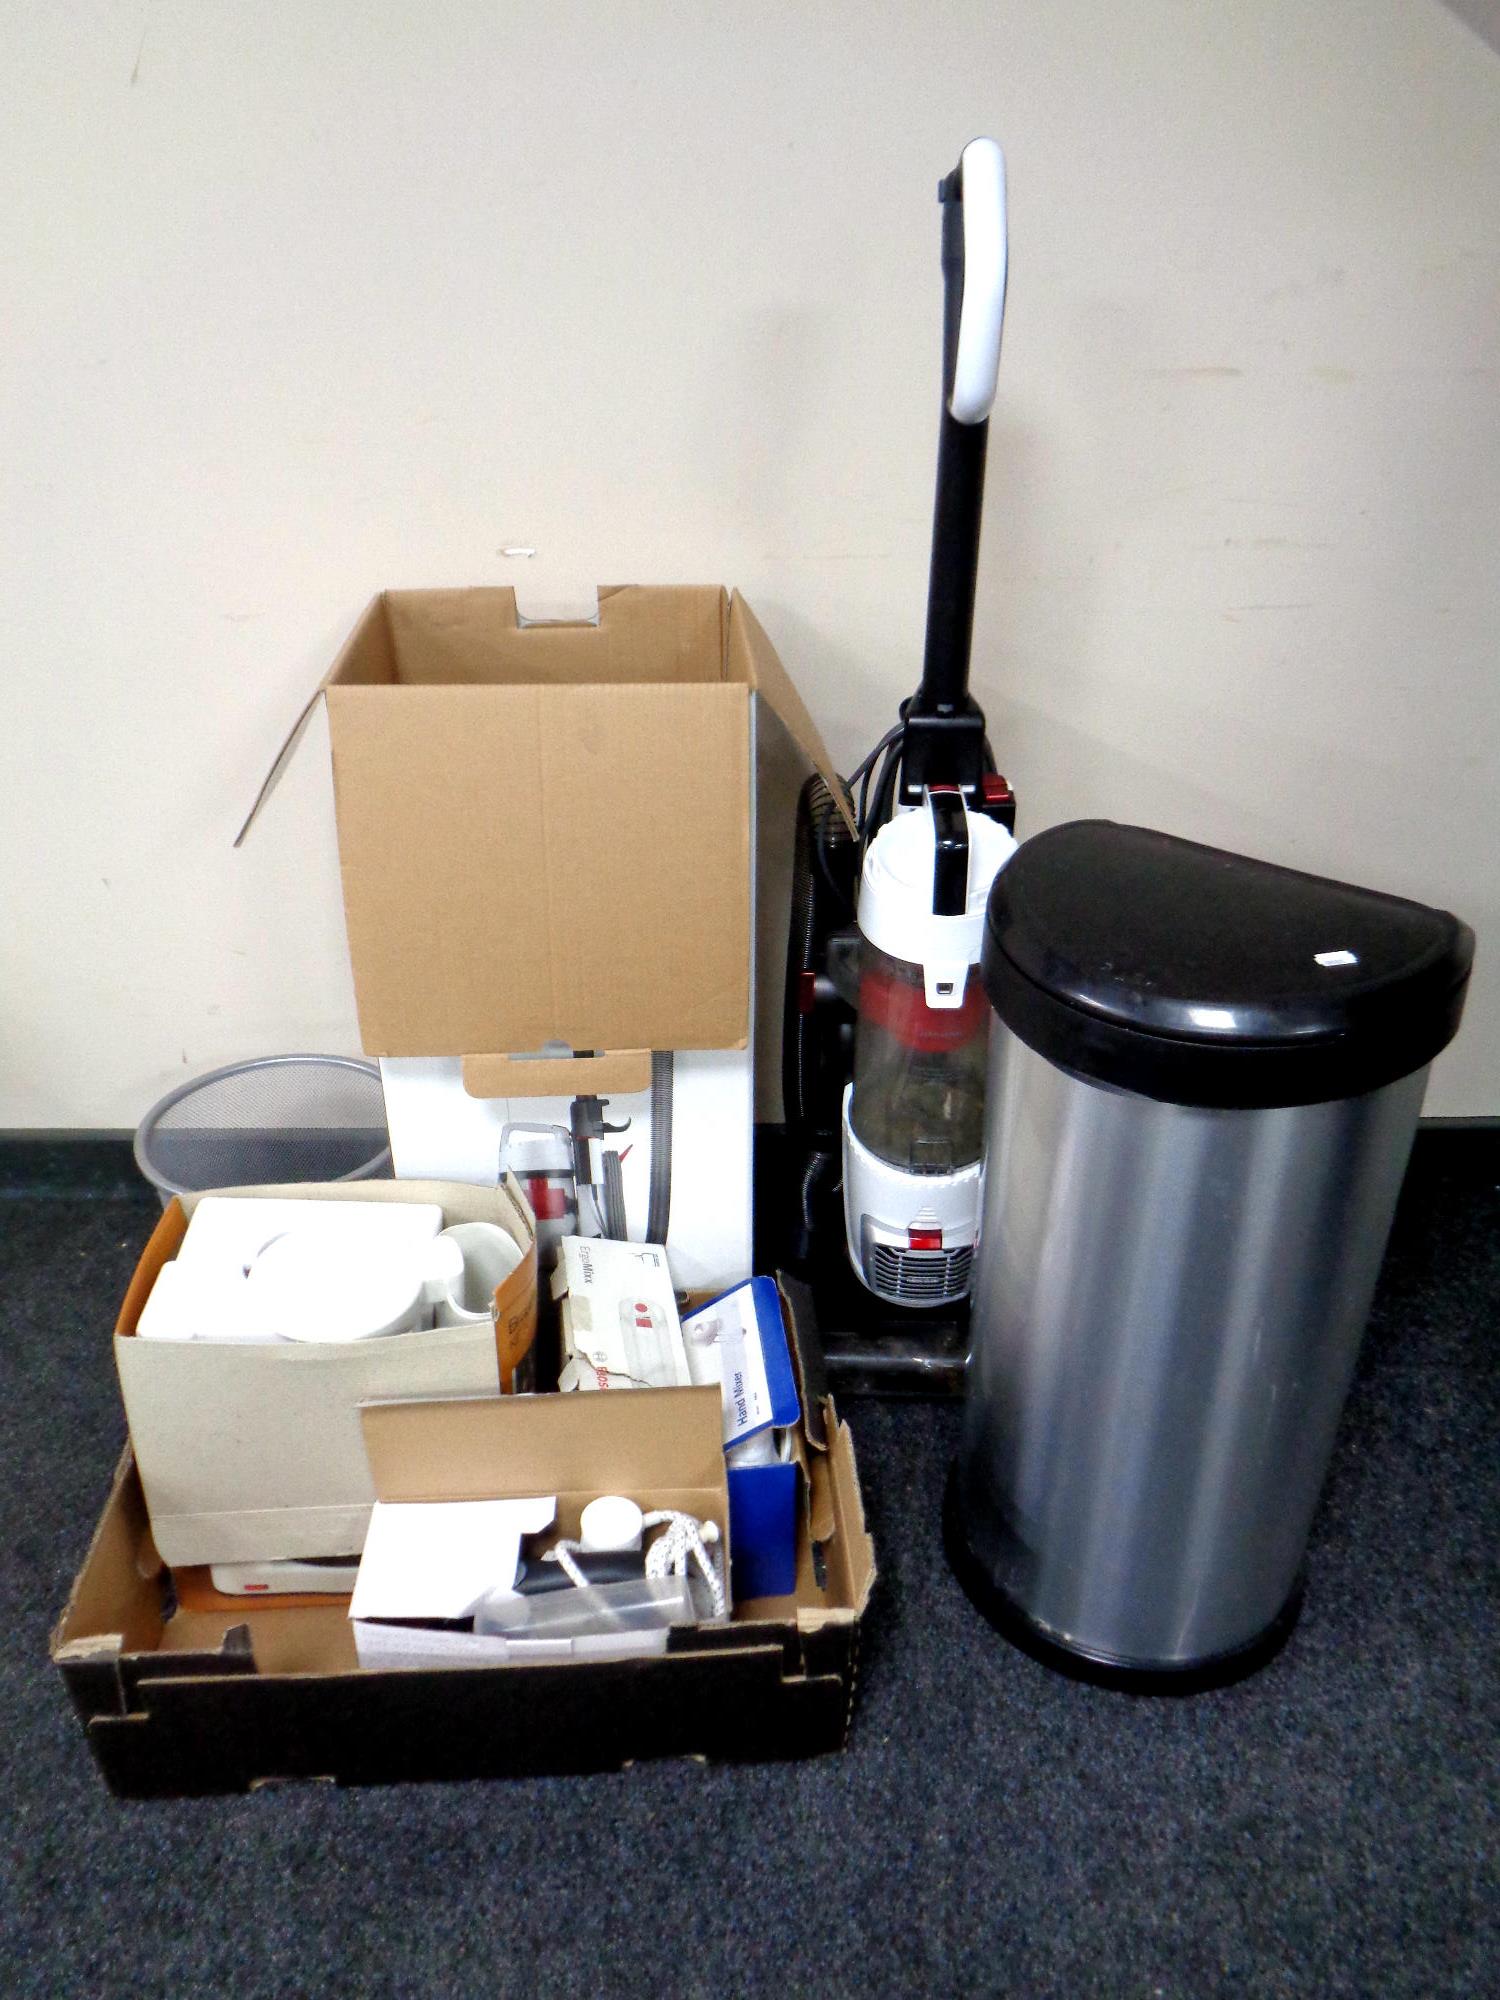 A John Lewis vacuum, together with a box containing Iron, Bosch hand mixer,